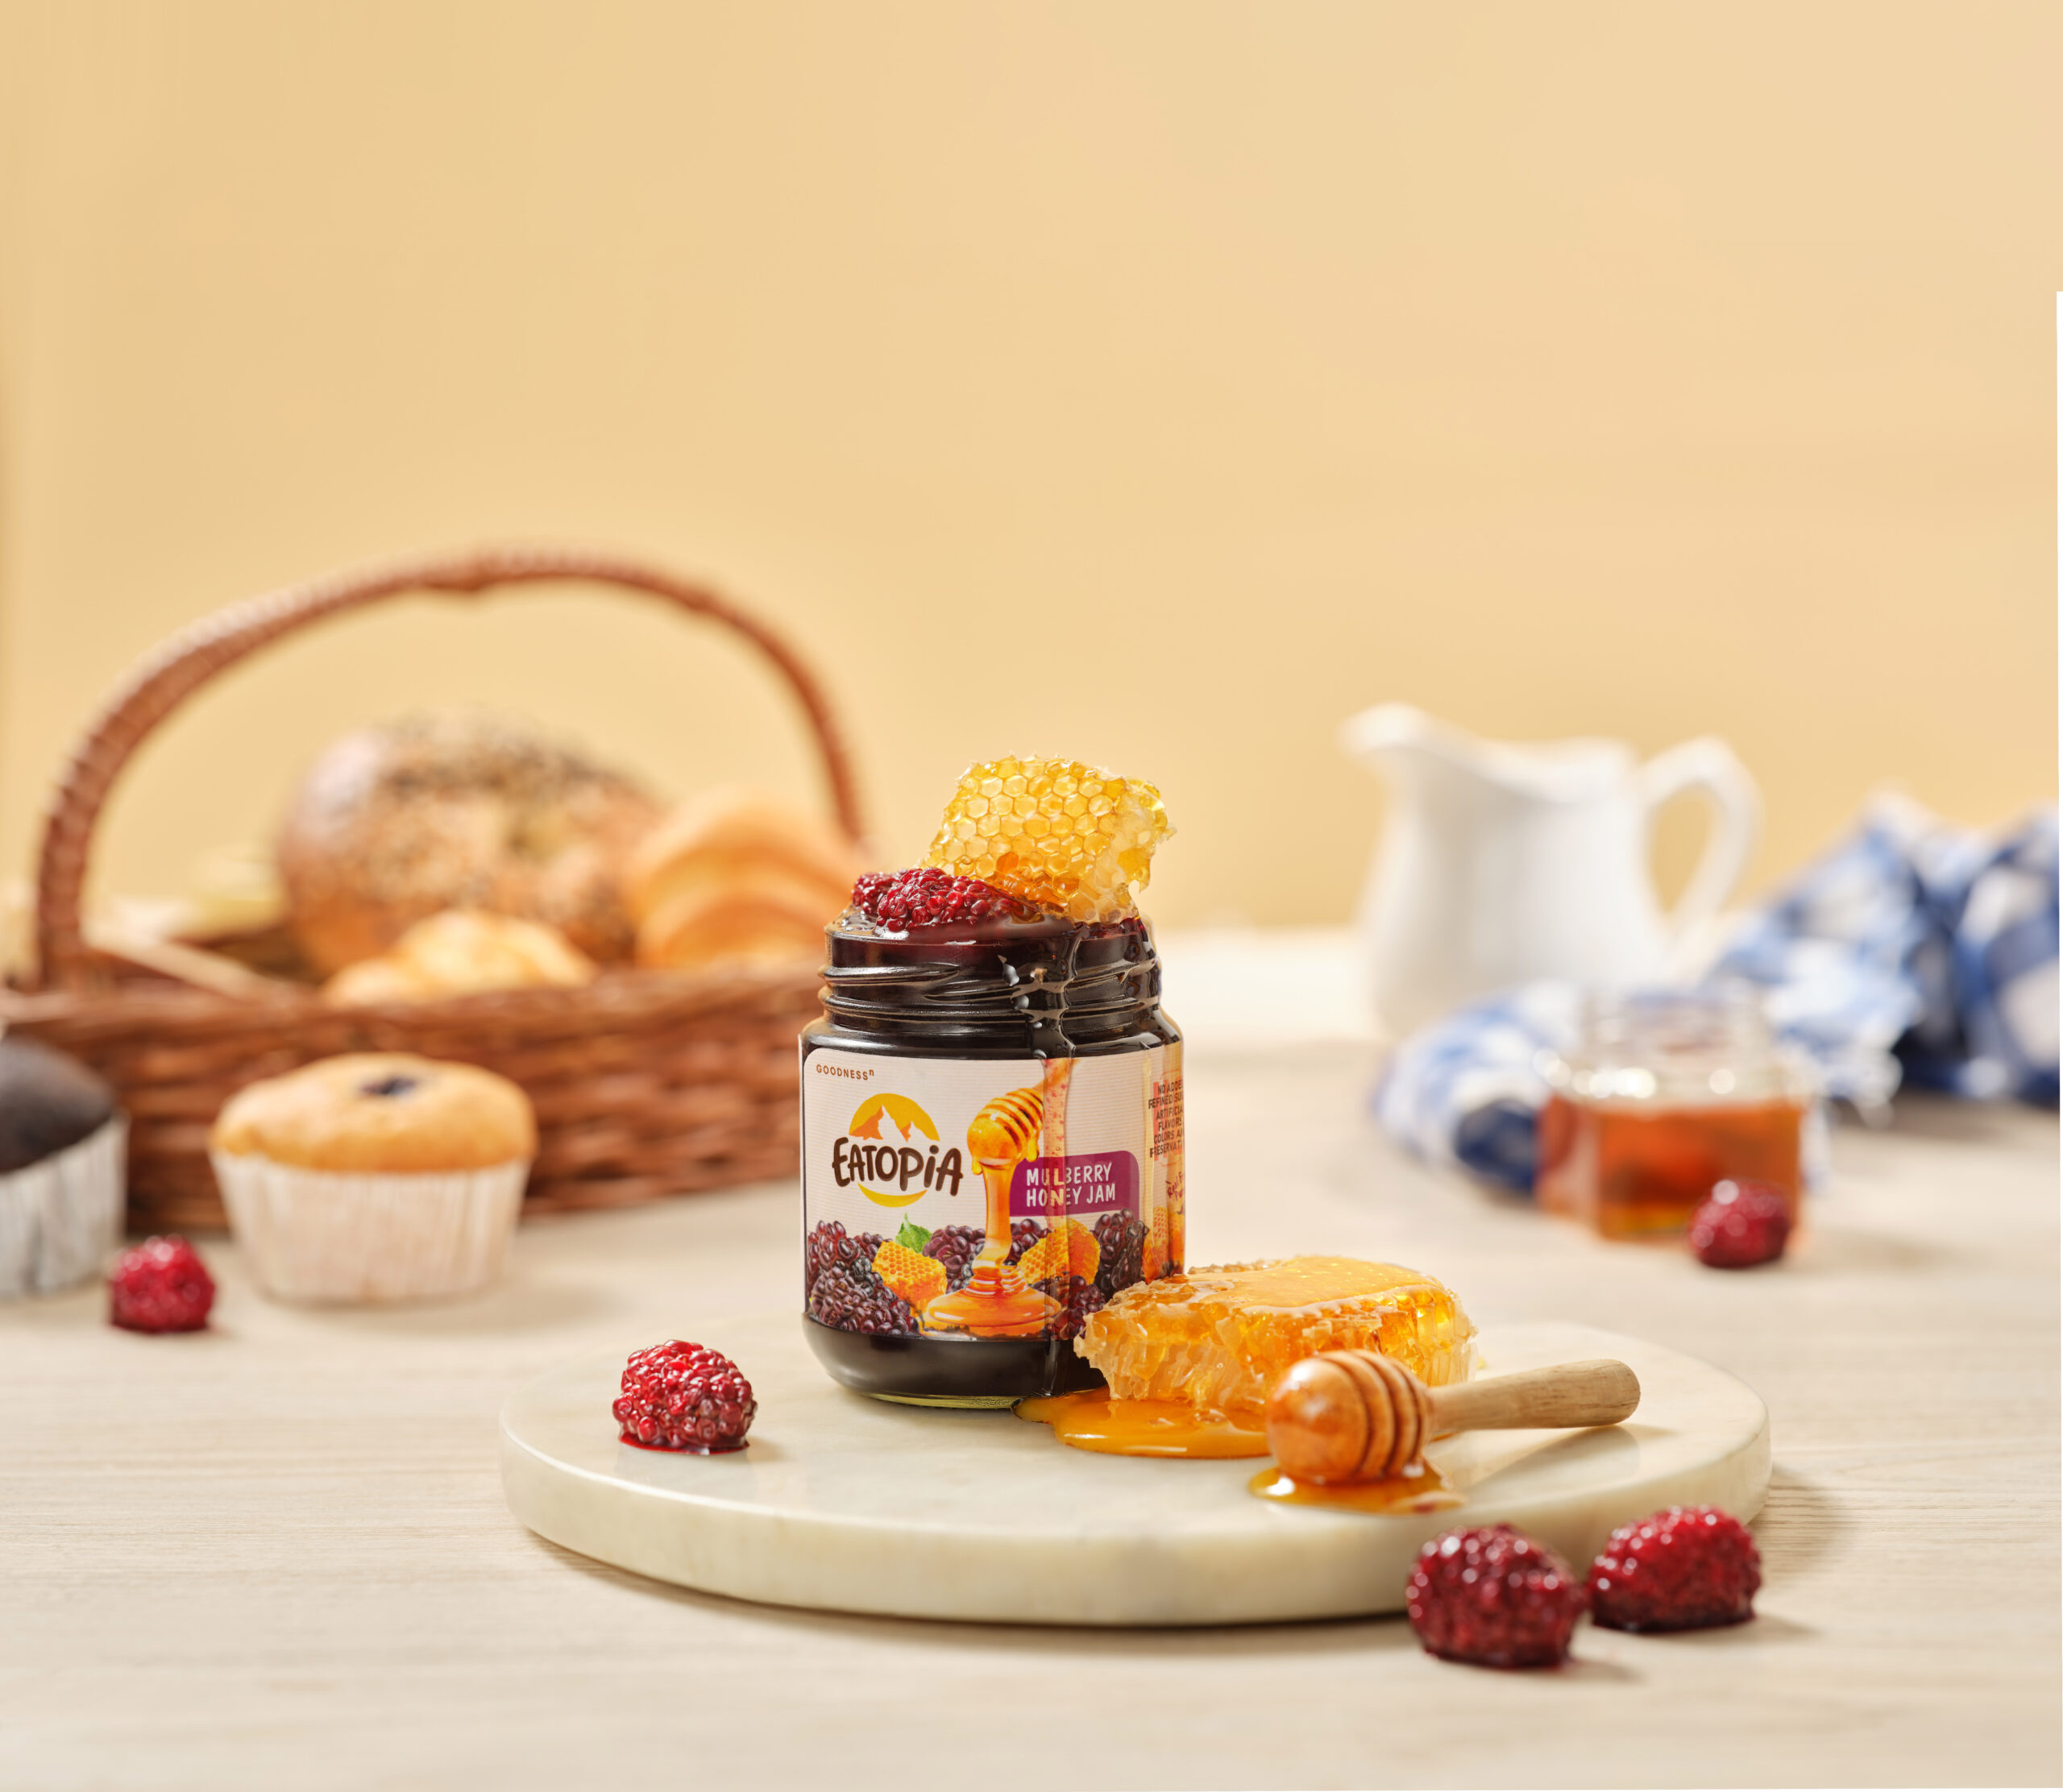 Eatopia is here to spread good health with a yummier, tastier alternative to conventional jams, made with all things 100% pure and natural.